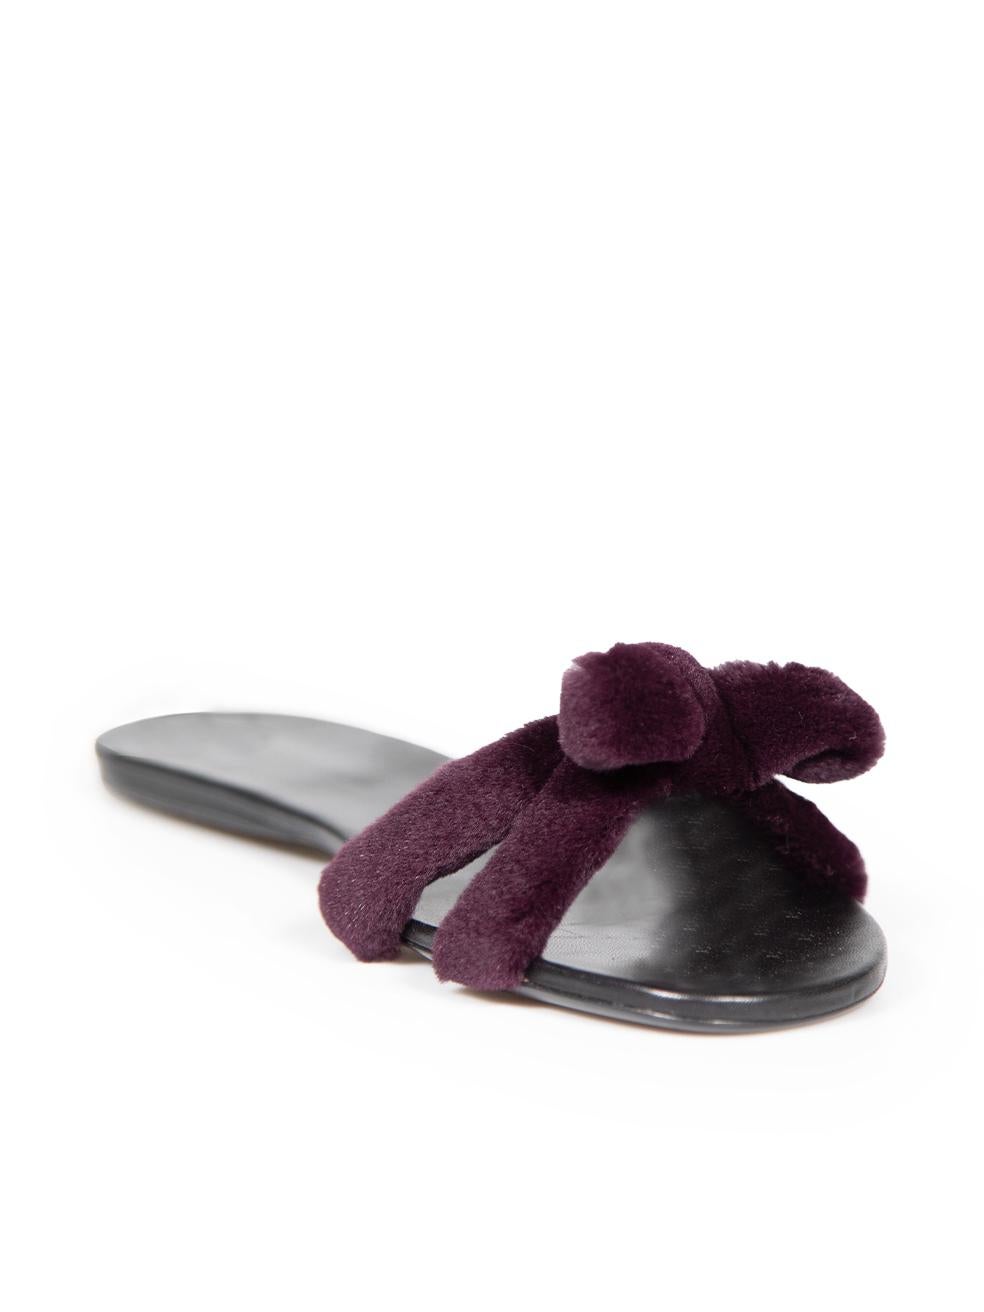 CONDITION is Very good. Minimal wear to slides is evident. Minimal wear to the insoles is seen with a few scratches and abrasions on this used The Row designer resale item.
 
 
 
 Details
 
 
 Model: Hollie
 
 Purple
 
 Mink fur
 
 Slide sandals
 
